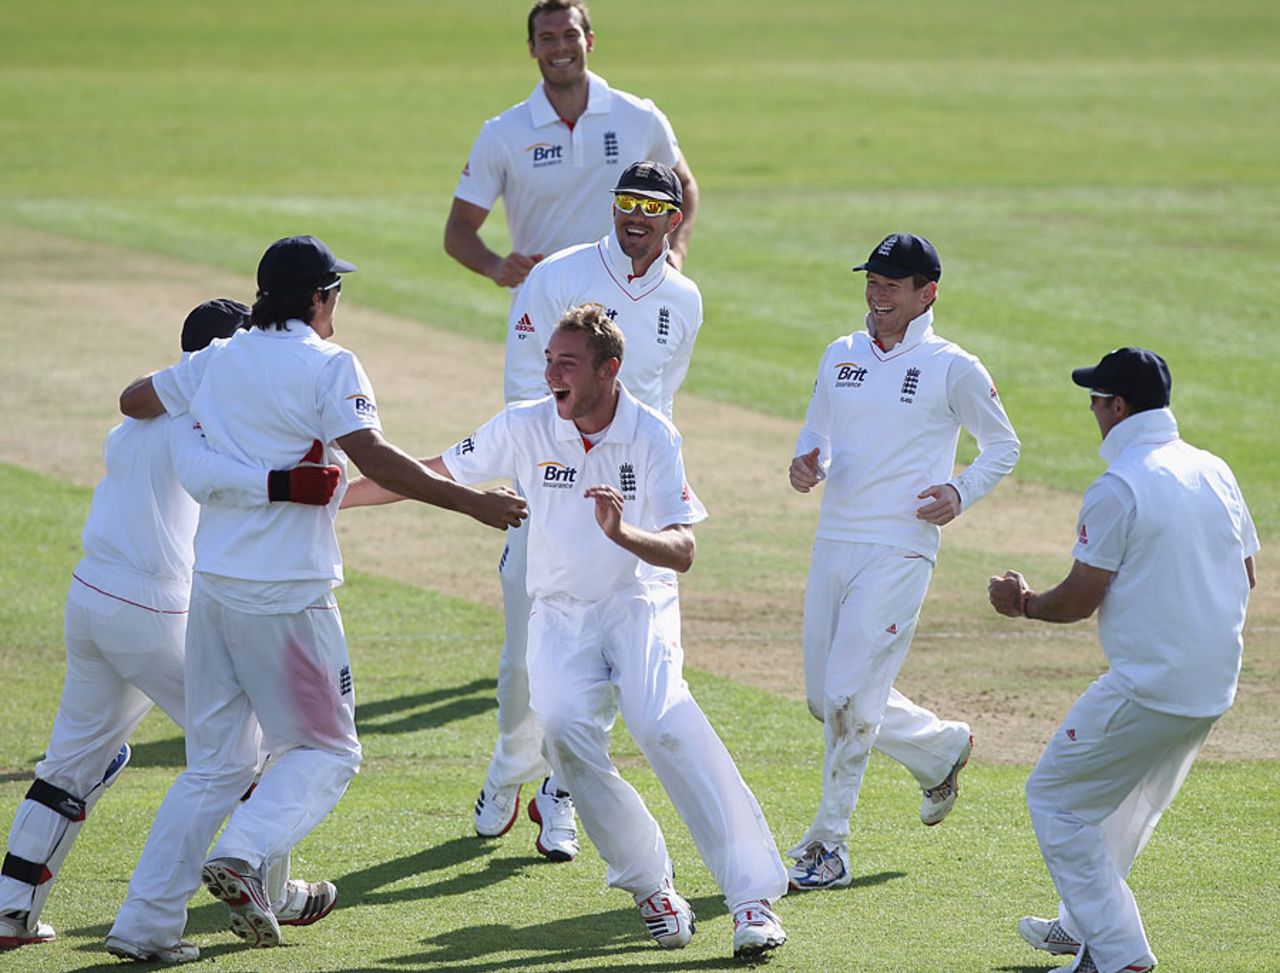 England begin celebrating after Stuart Broad claims the final wicket, England v Sri Lanka, 1st Test, Cardiff, 5th day, May 30, 2011